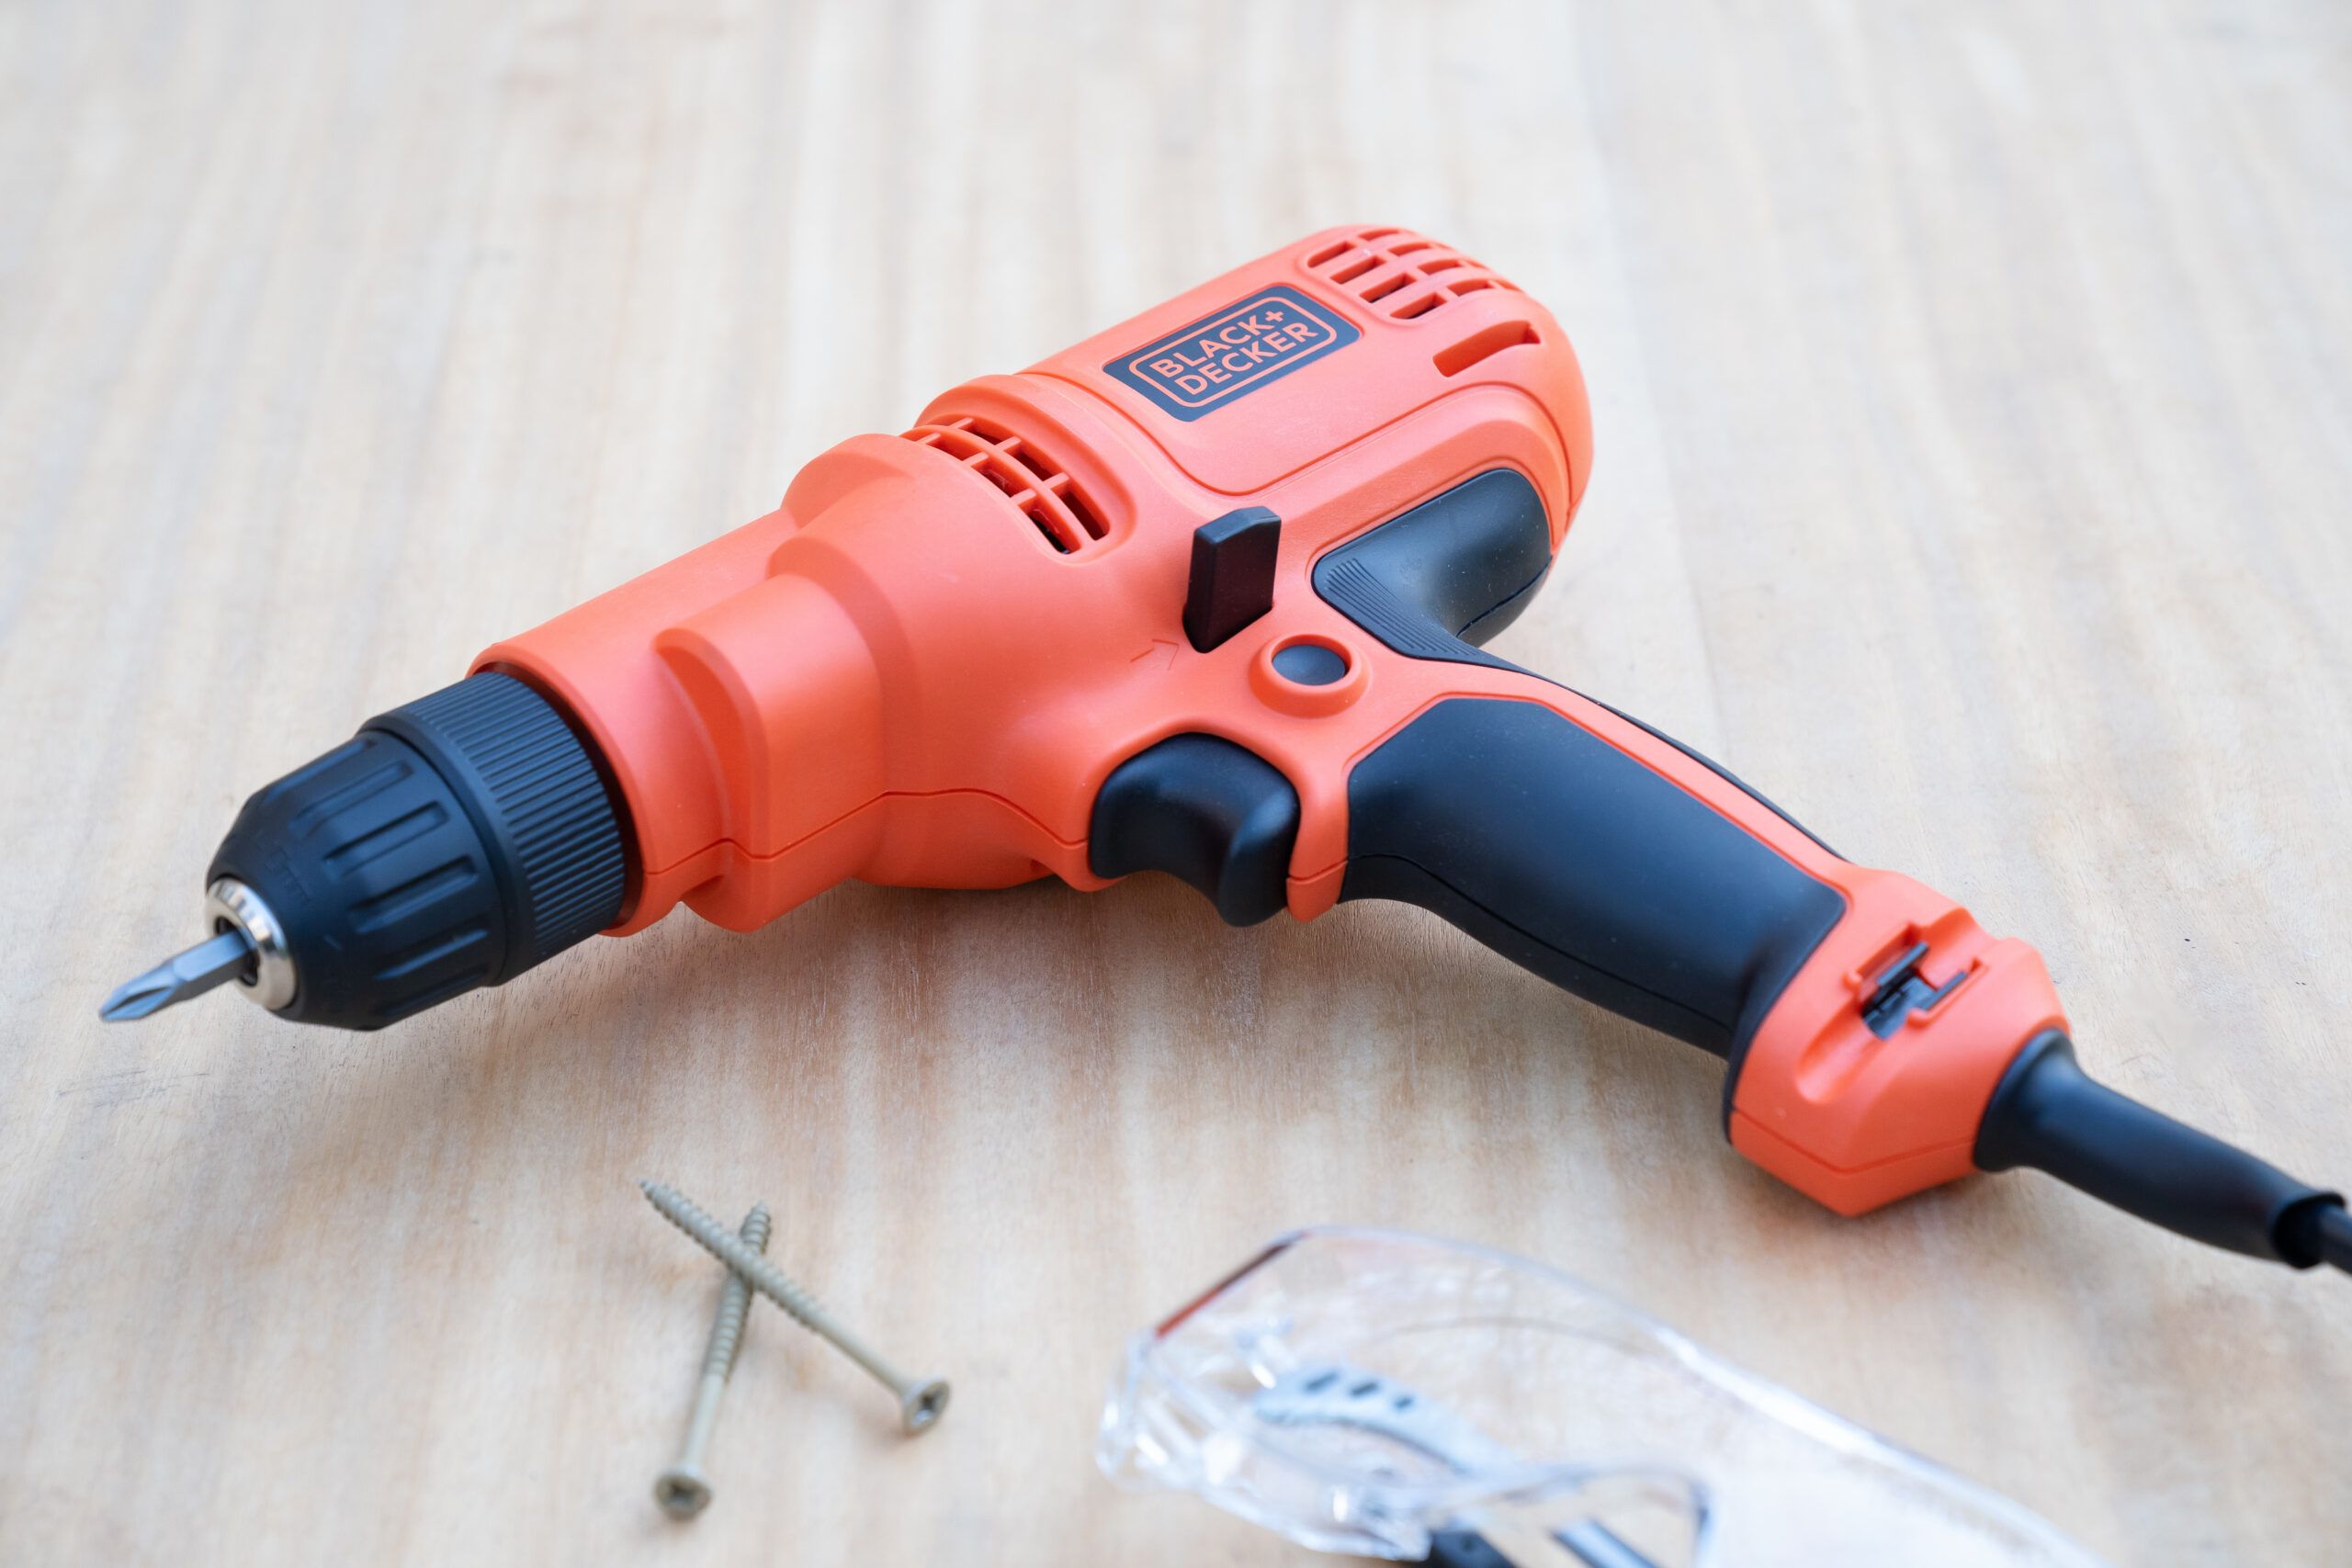 BLACK + DECKER corded drill and screws on a wooden surface. Lead image for Best Drills guide.